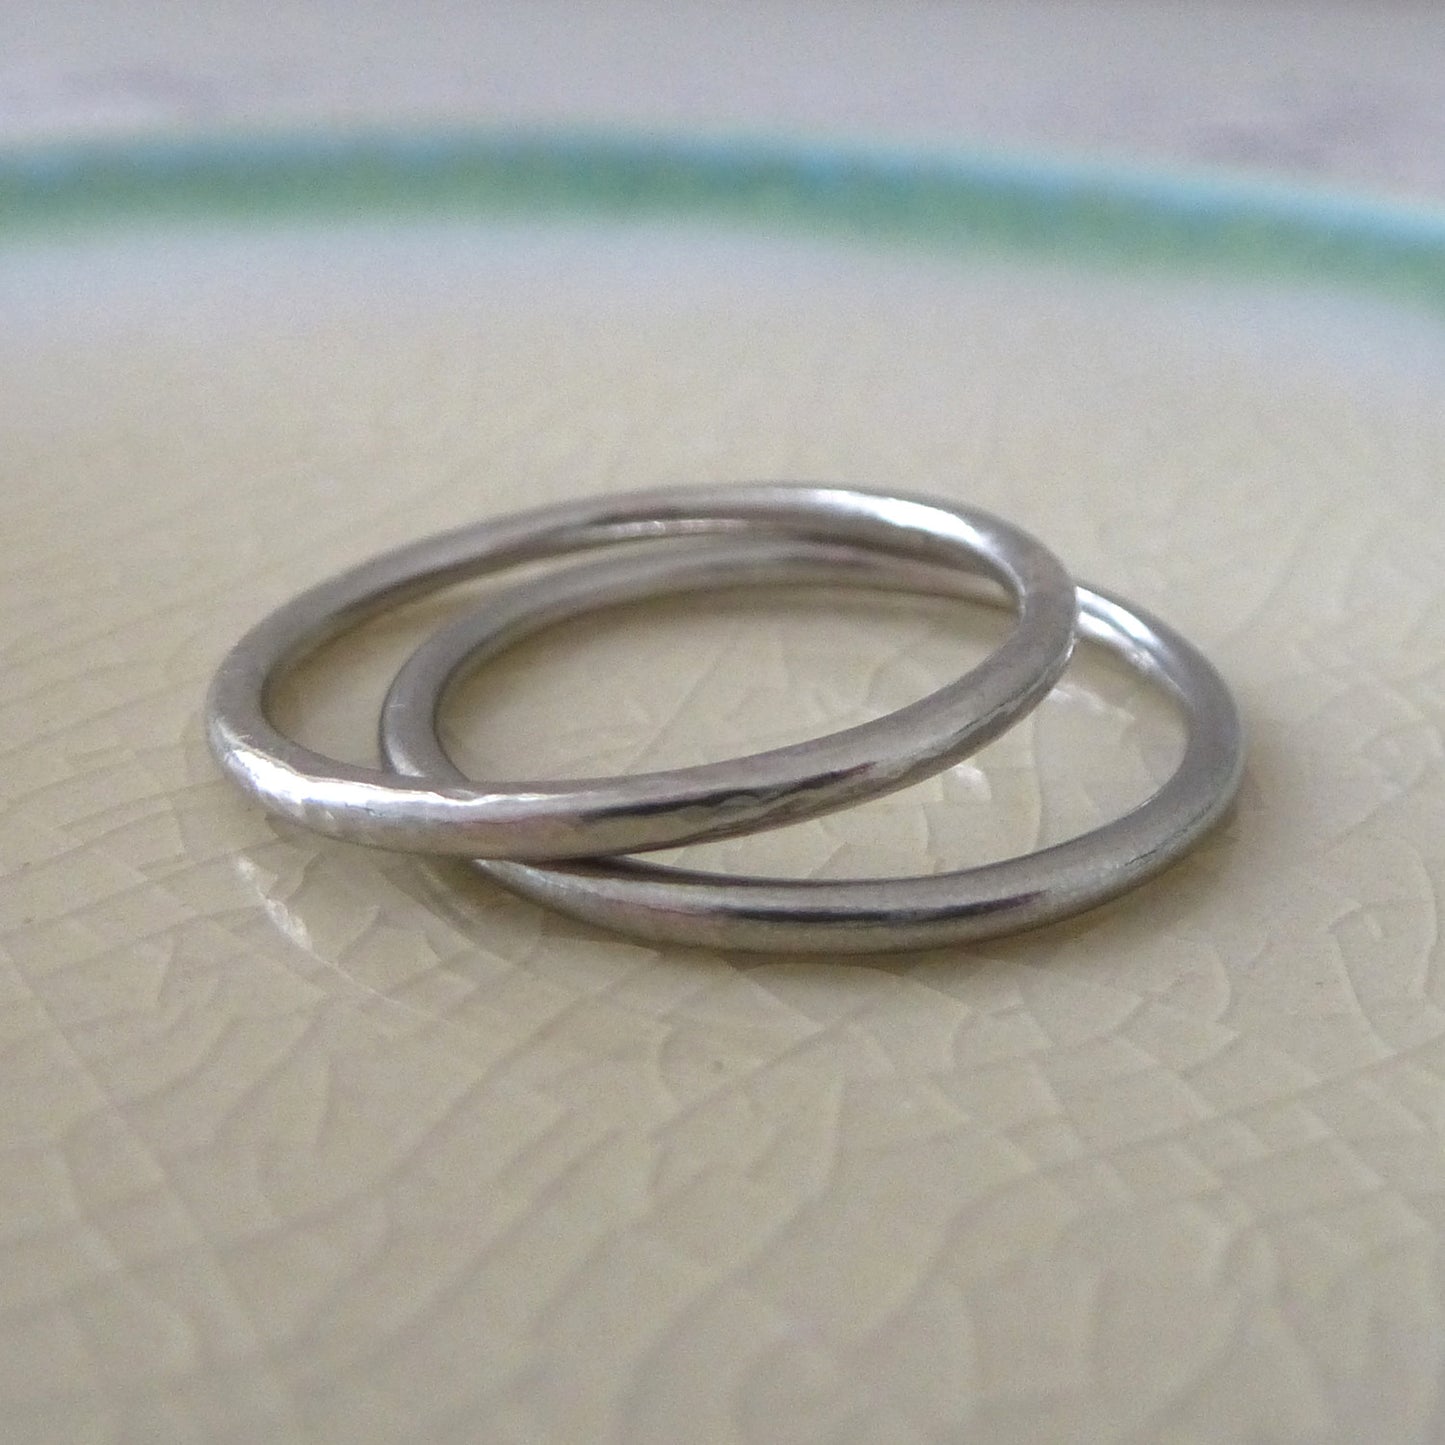 Elegant Band Ring in 18ct White Gold - 1.5mm - Hammered or Smooth